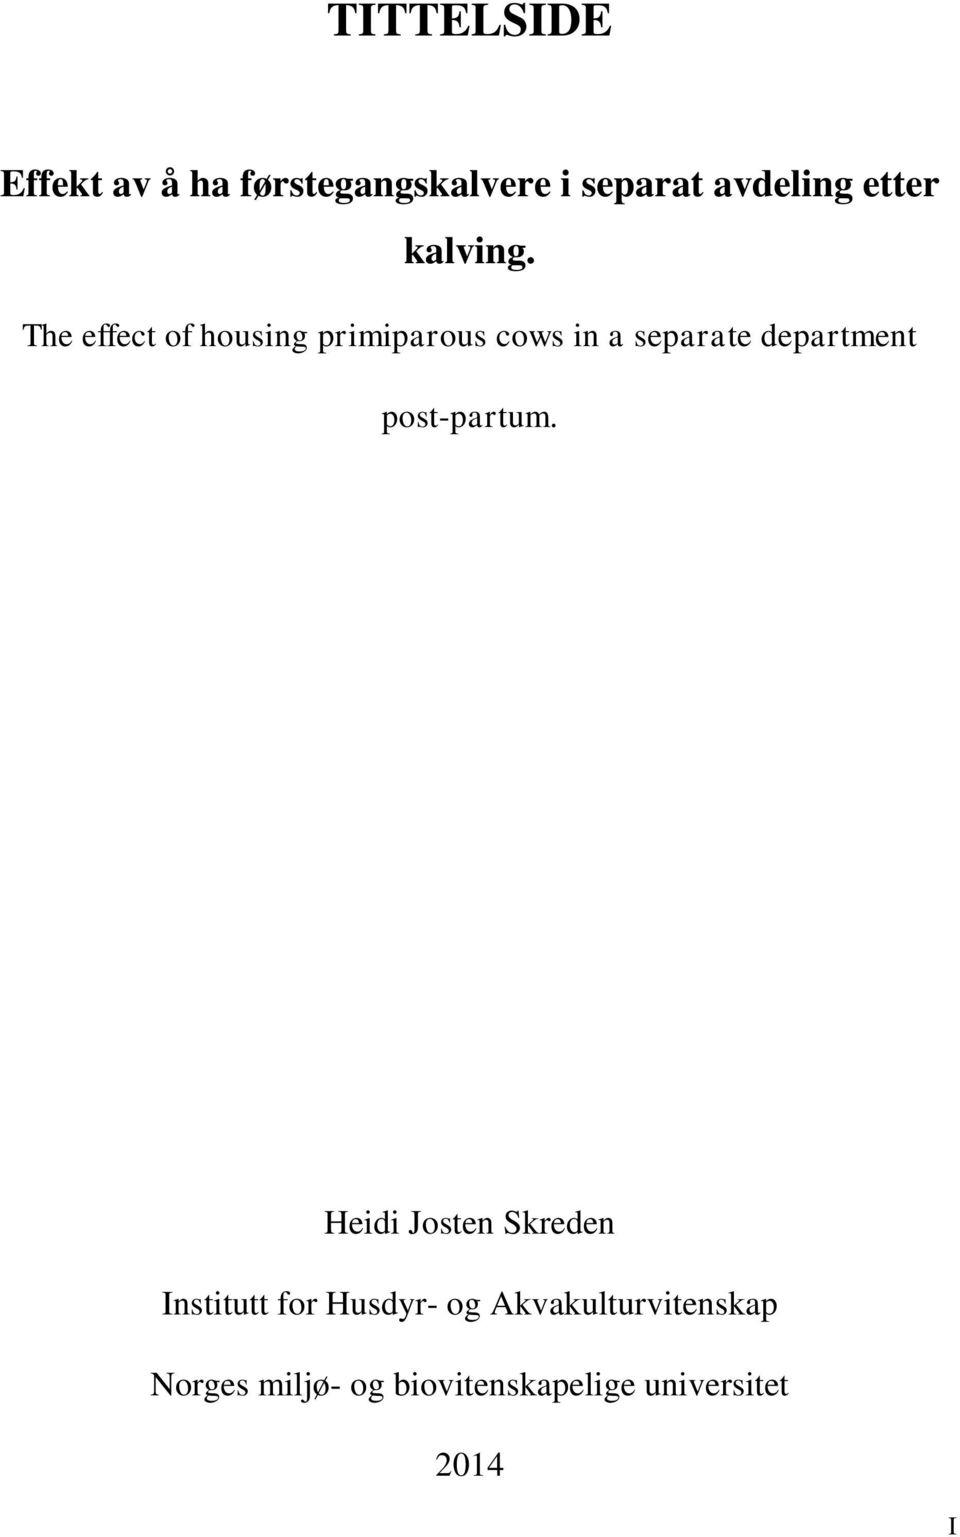 The effect of housing primiparous cows in a separate department